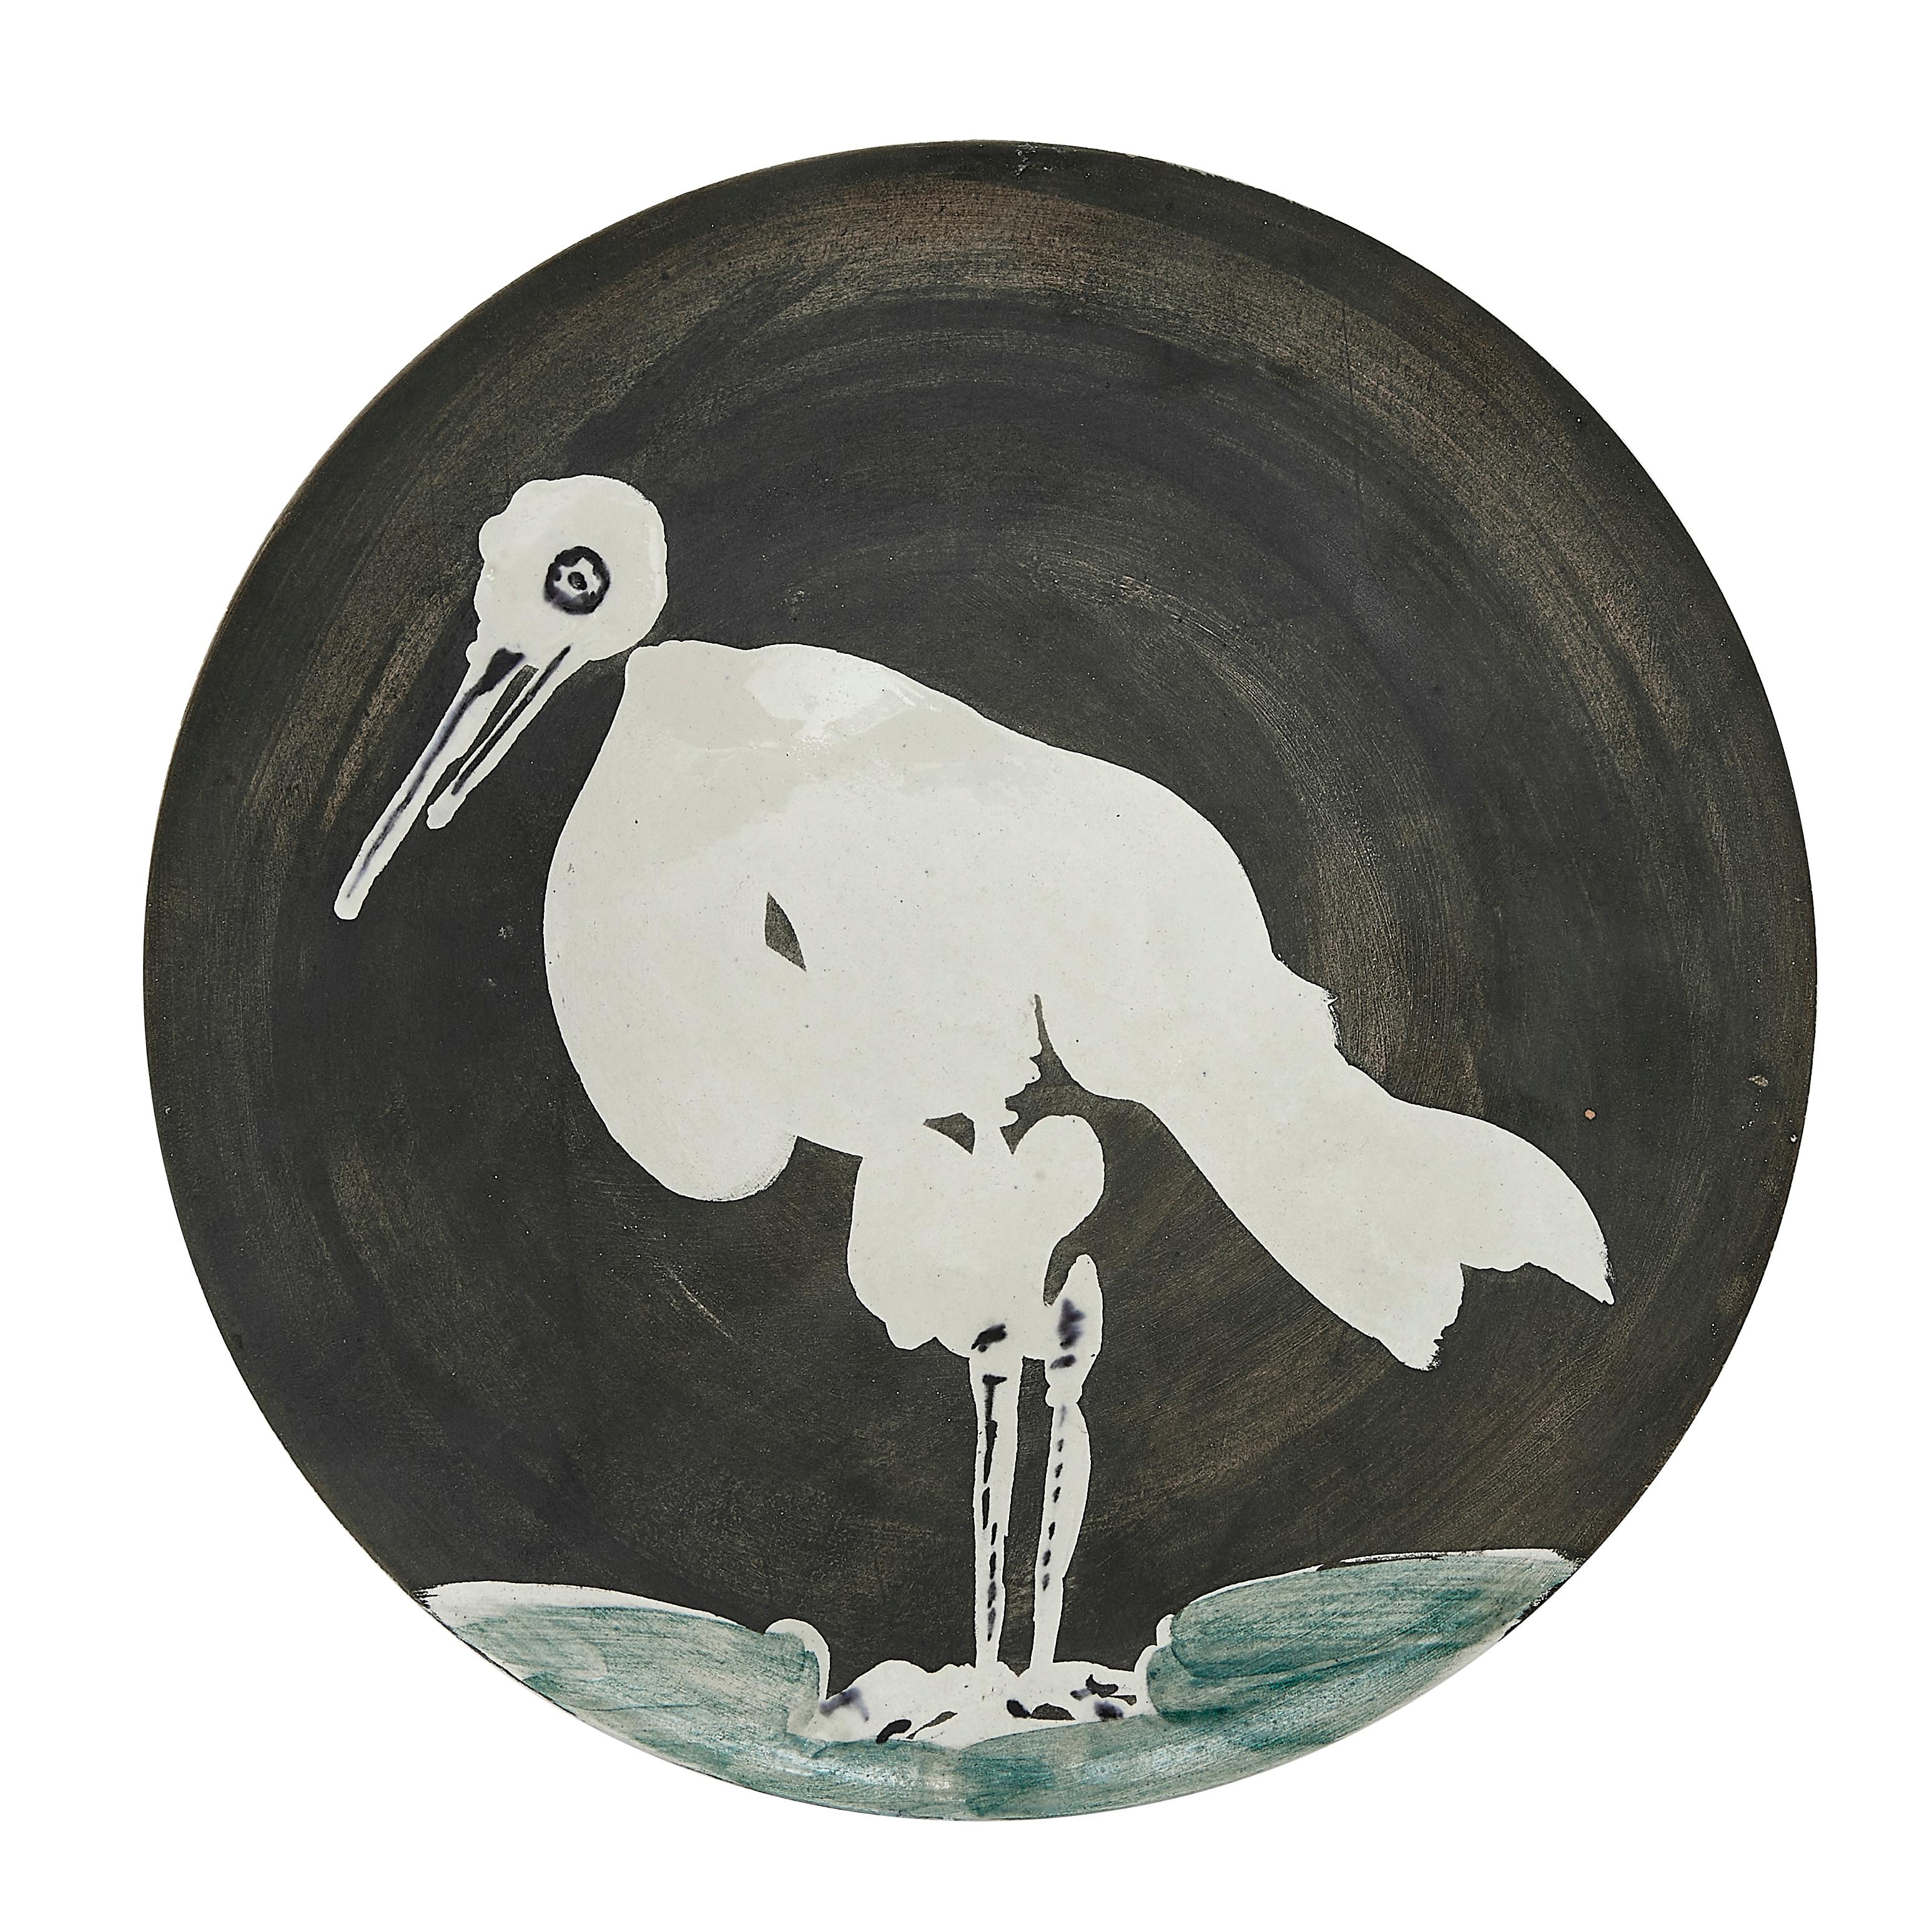 PABLO PICASSO (1881-1973) 
Oiseau No. 83 (A. R. 483)

Terre de faïence plate, 1963, numbered 183/200, titled, inscribed 'Edition Picasso' and 'Madoura', partially glazed and painted.